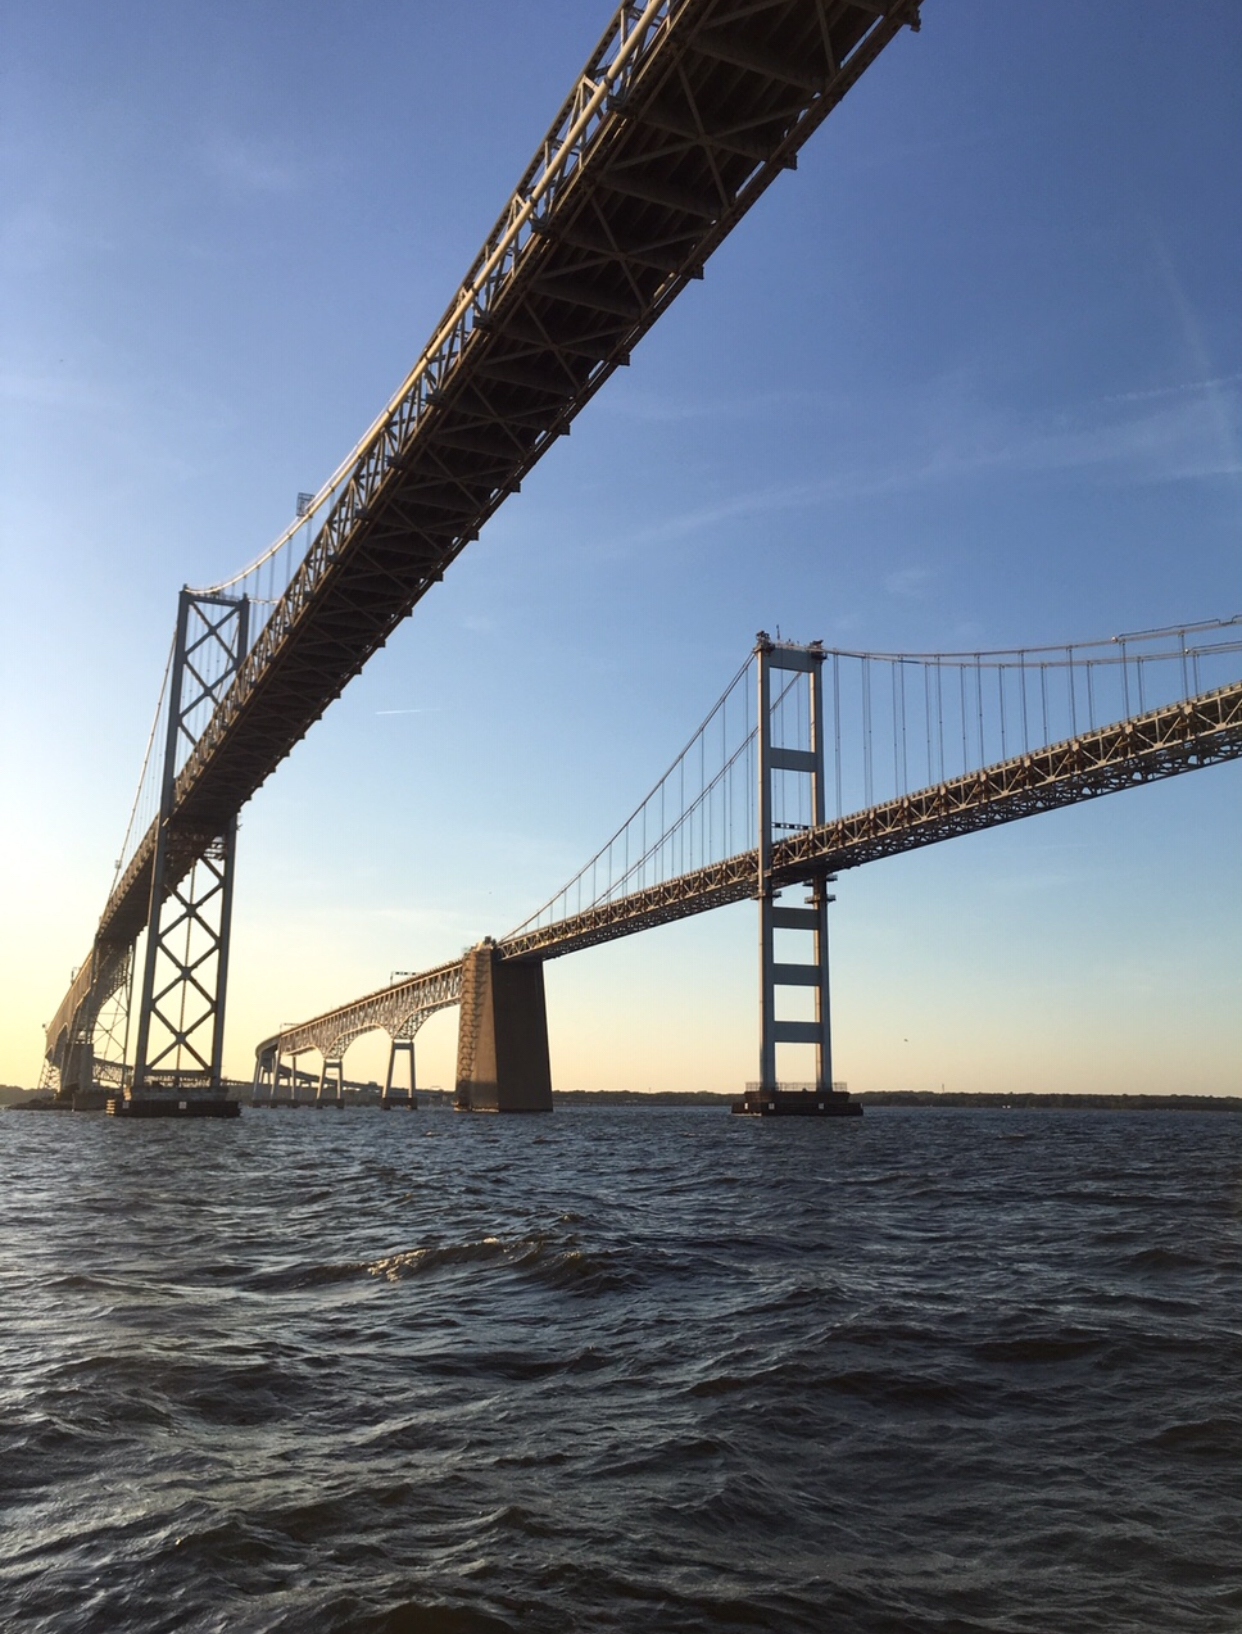 Both spans of the Bay Bridge with blue skies and water